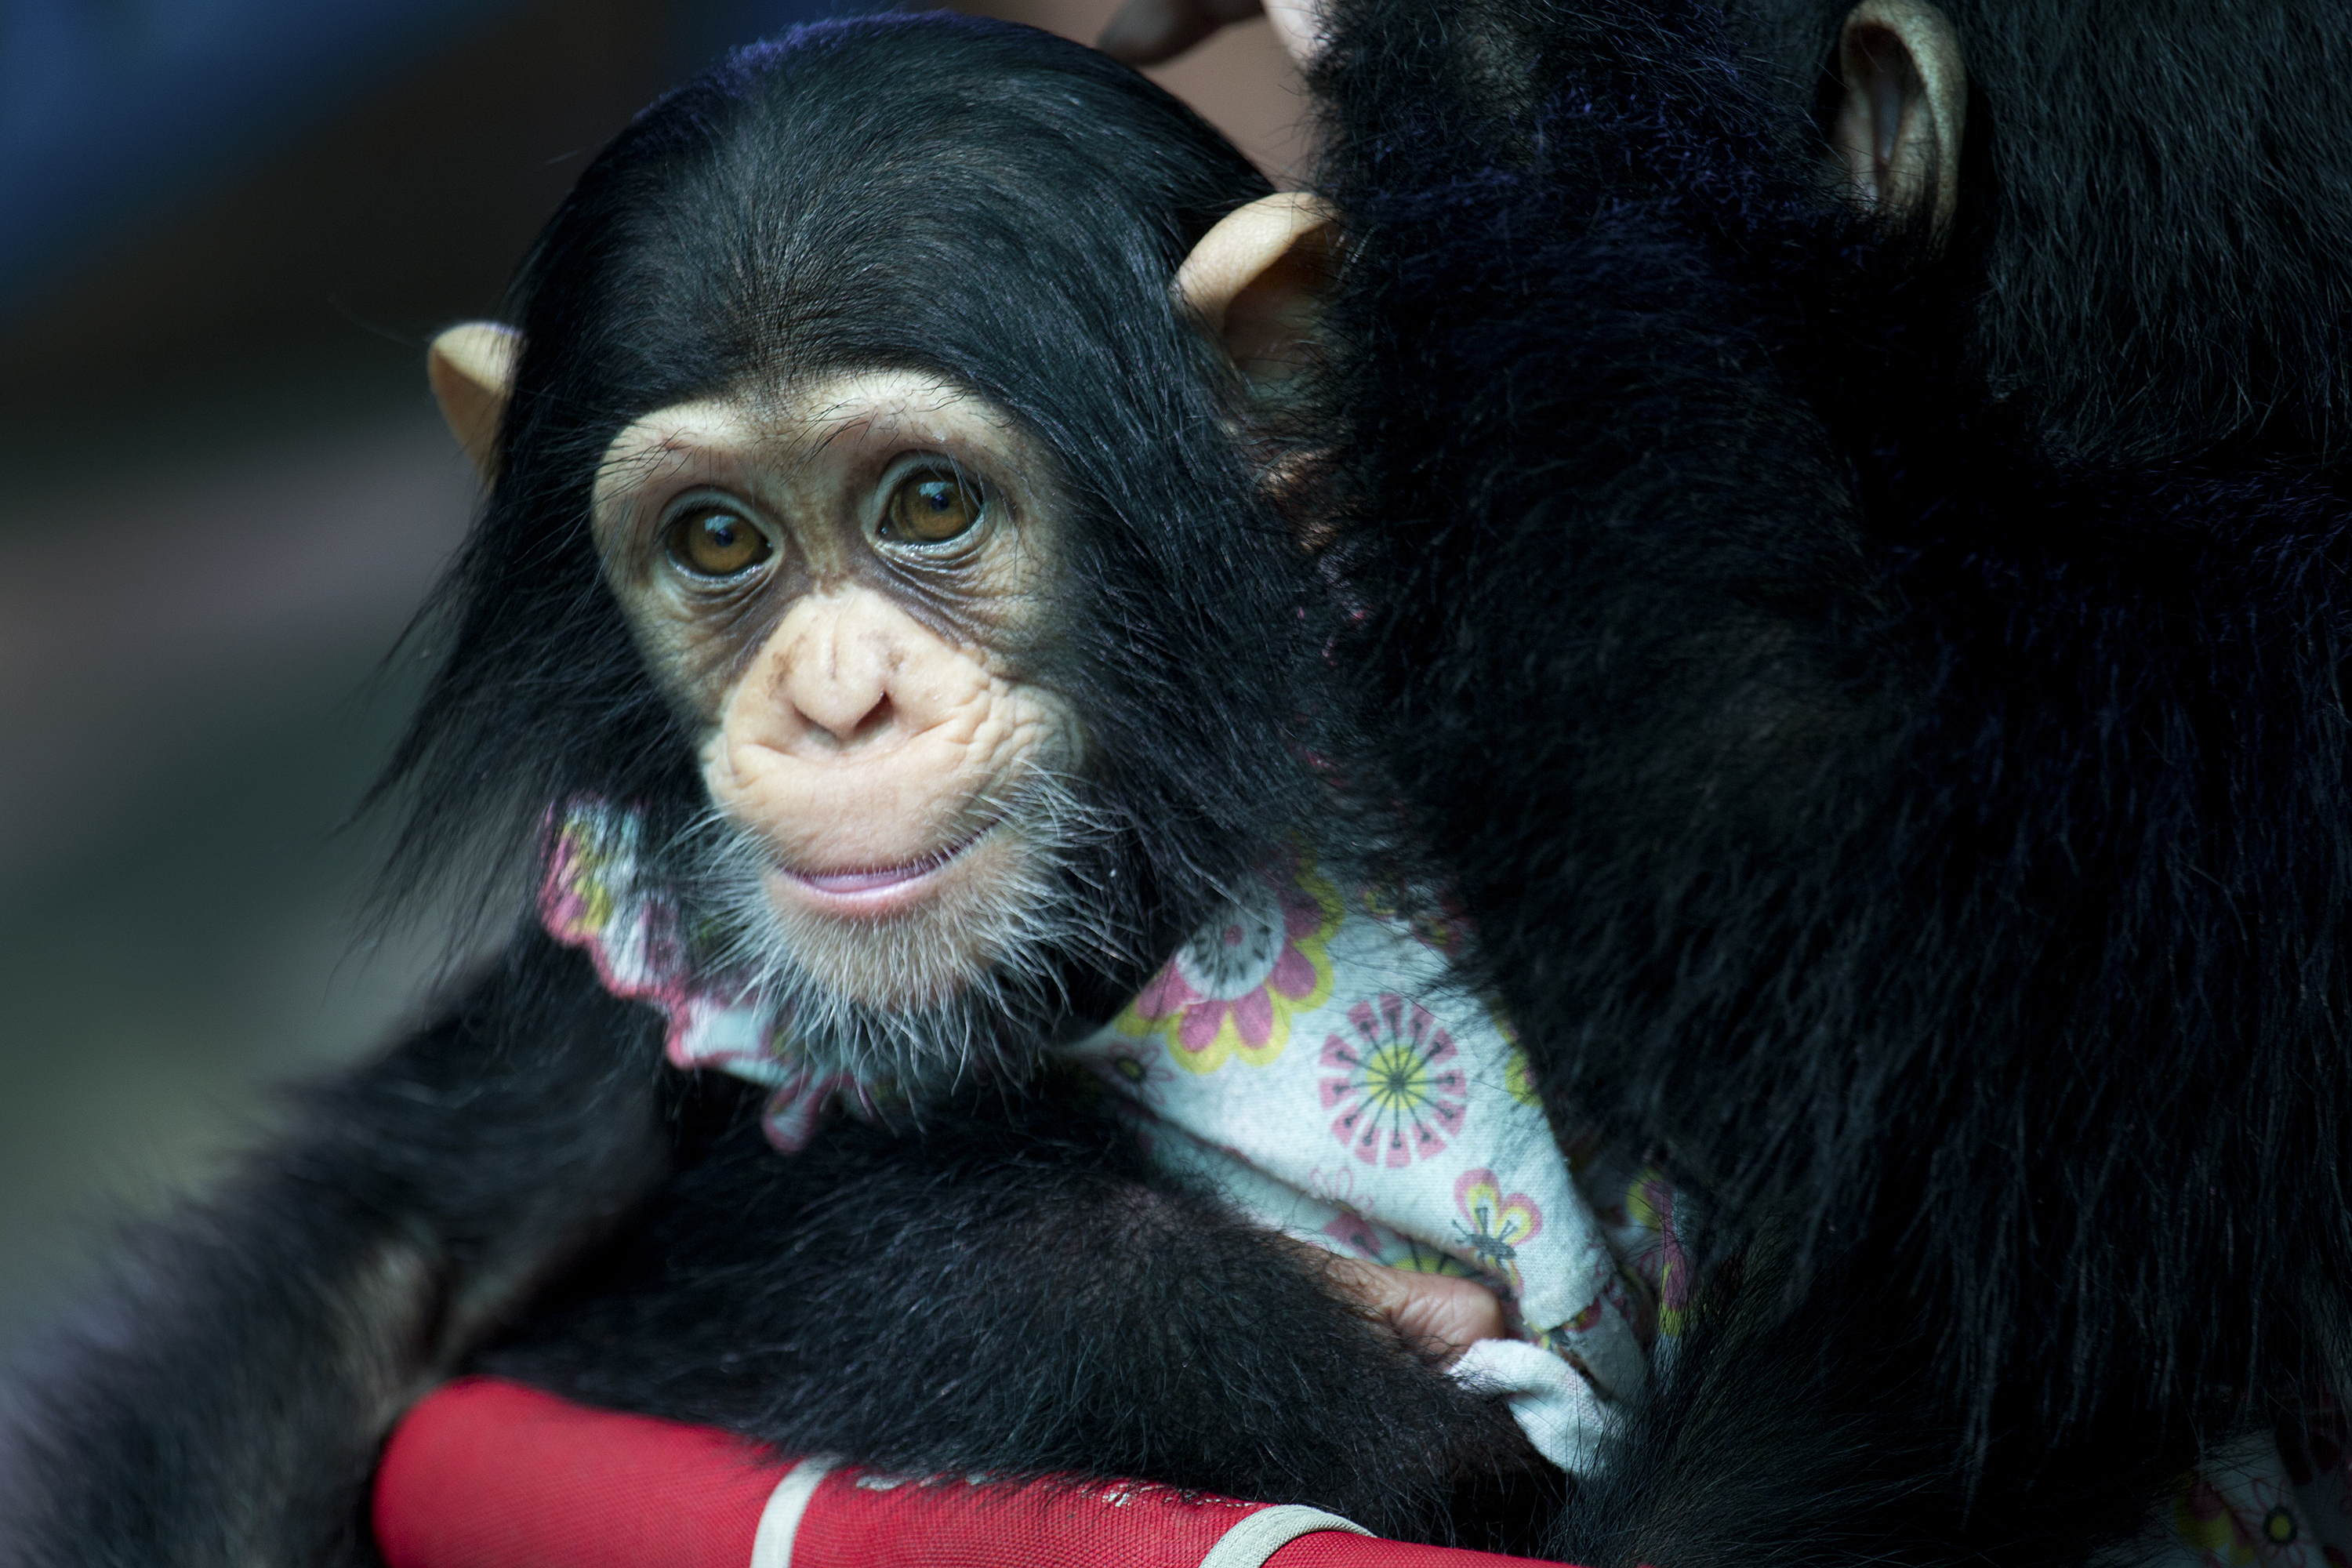 Young chimpanzee being held, looking at the camera